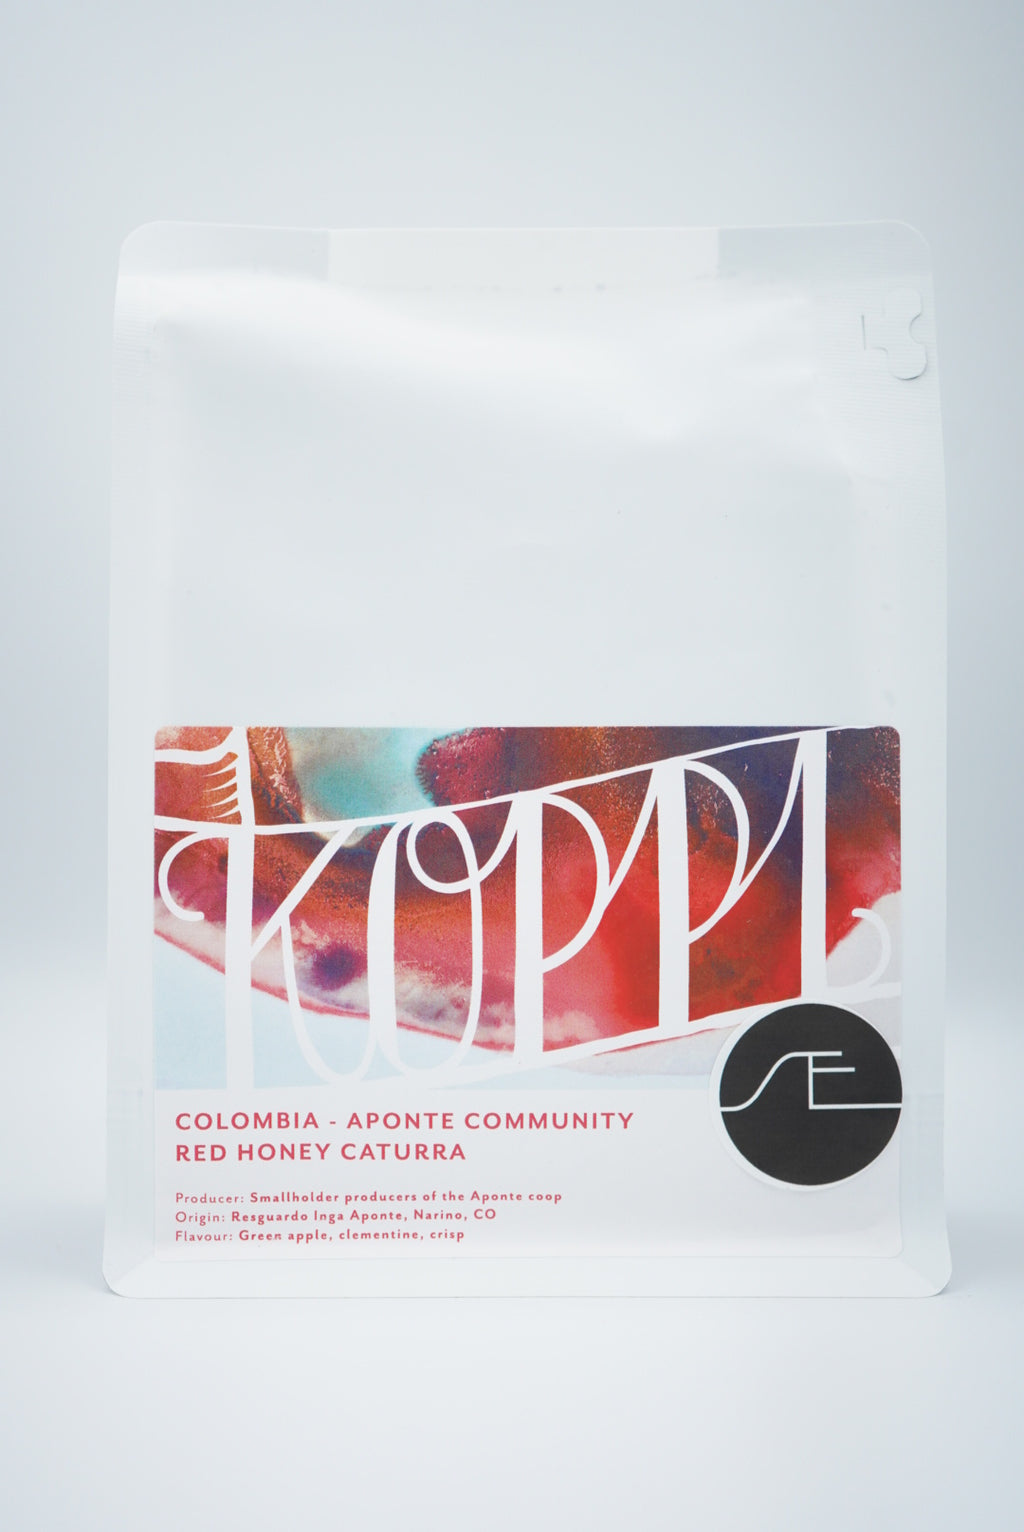 Colombia. Aponte Community. Red Honey Caturra